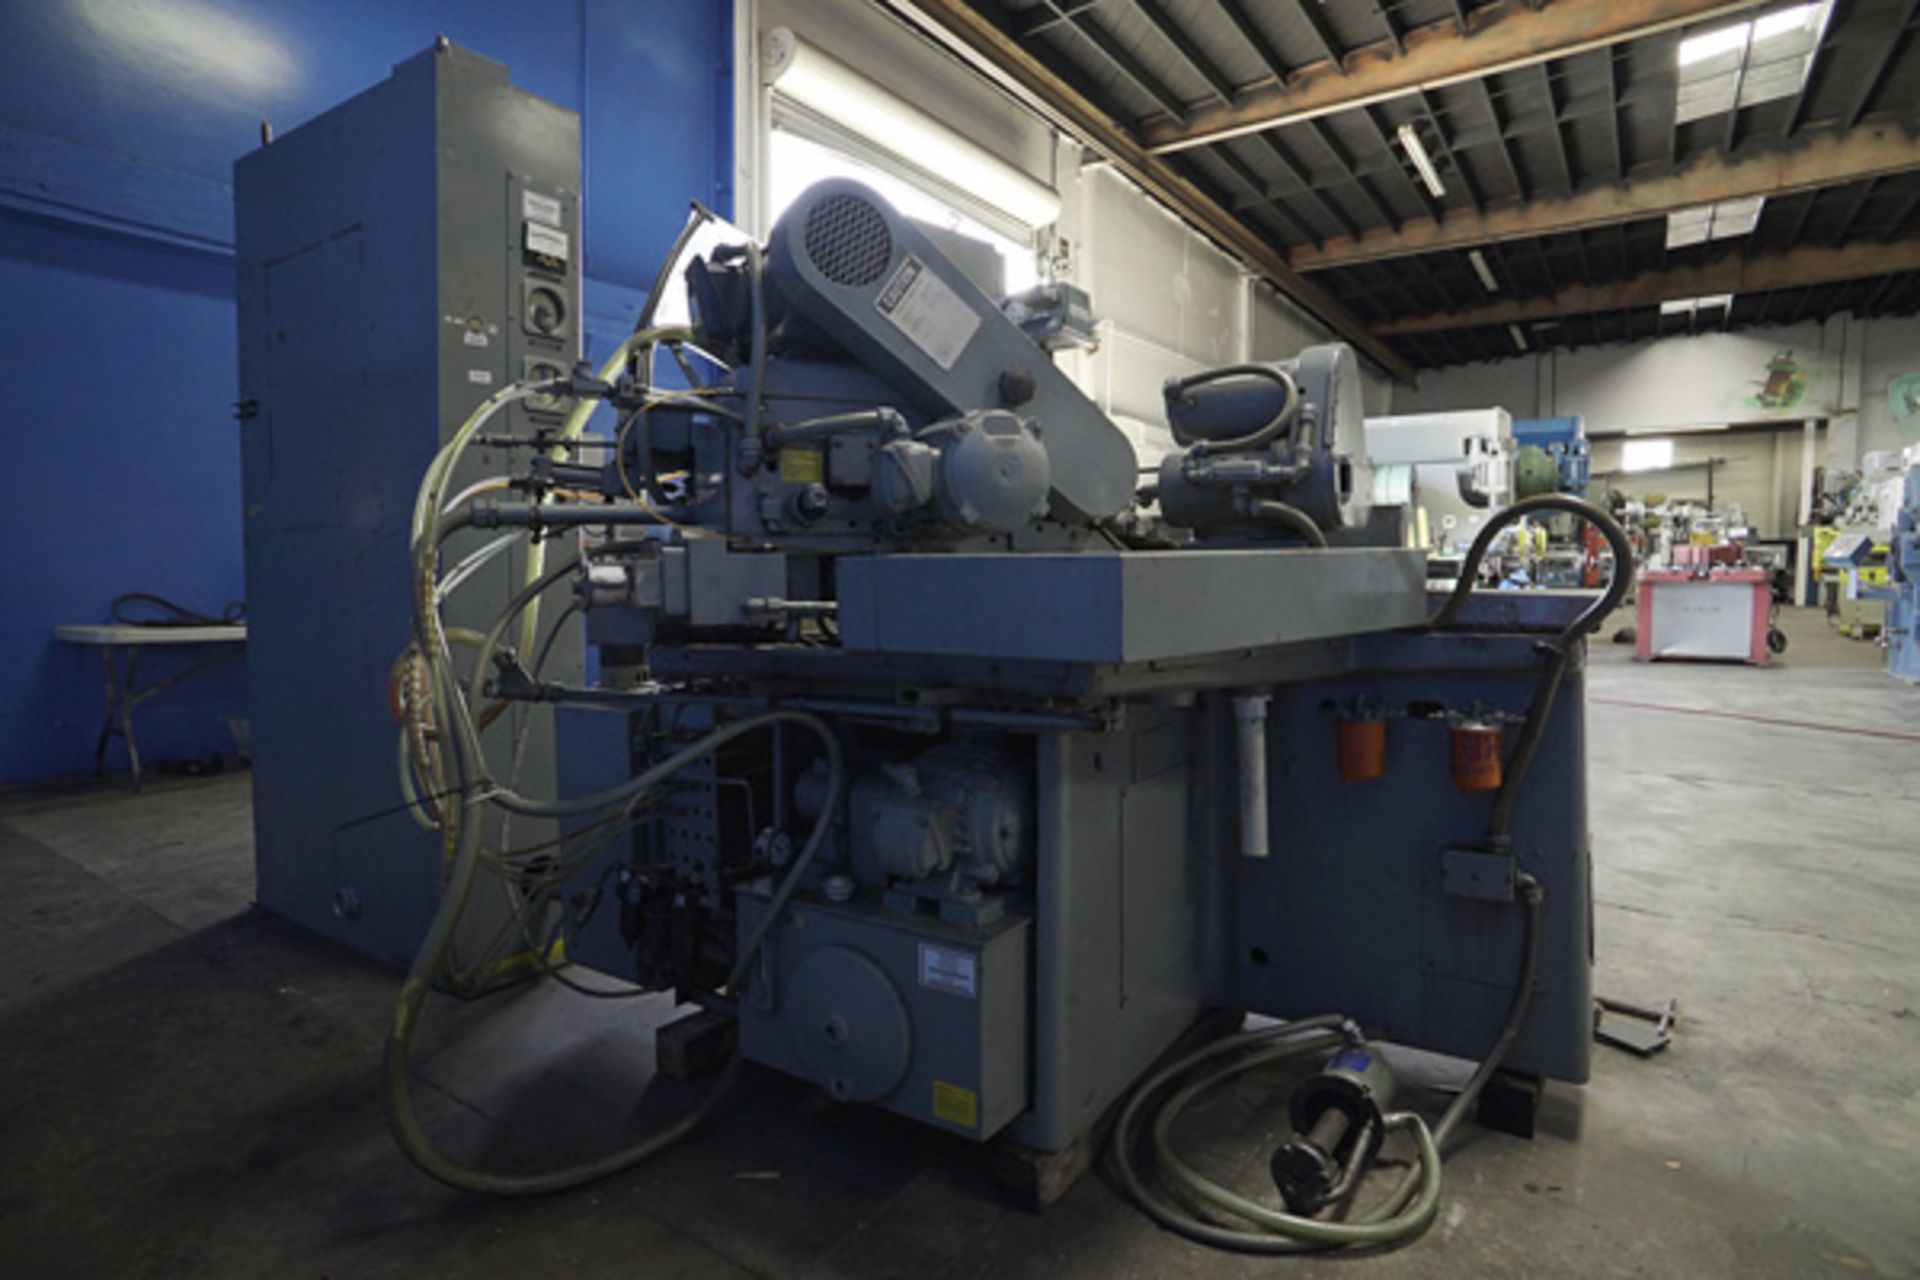 1973 Landis Angle Head Cylindrical Grinder | 10" x 20", Mdl: 1R, S/N: T-884-73 - 5040HP - Image 3 of 9